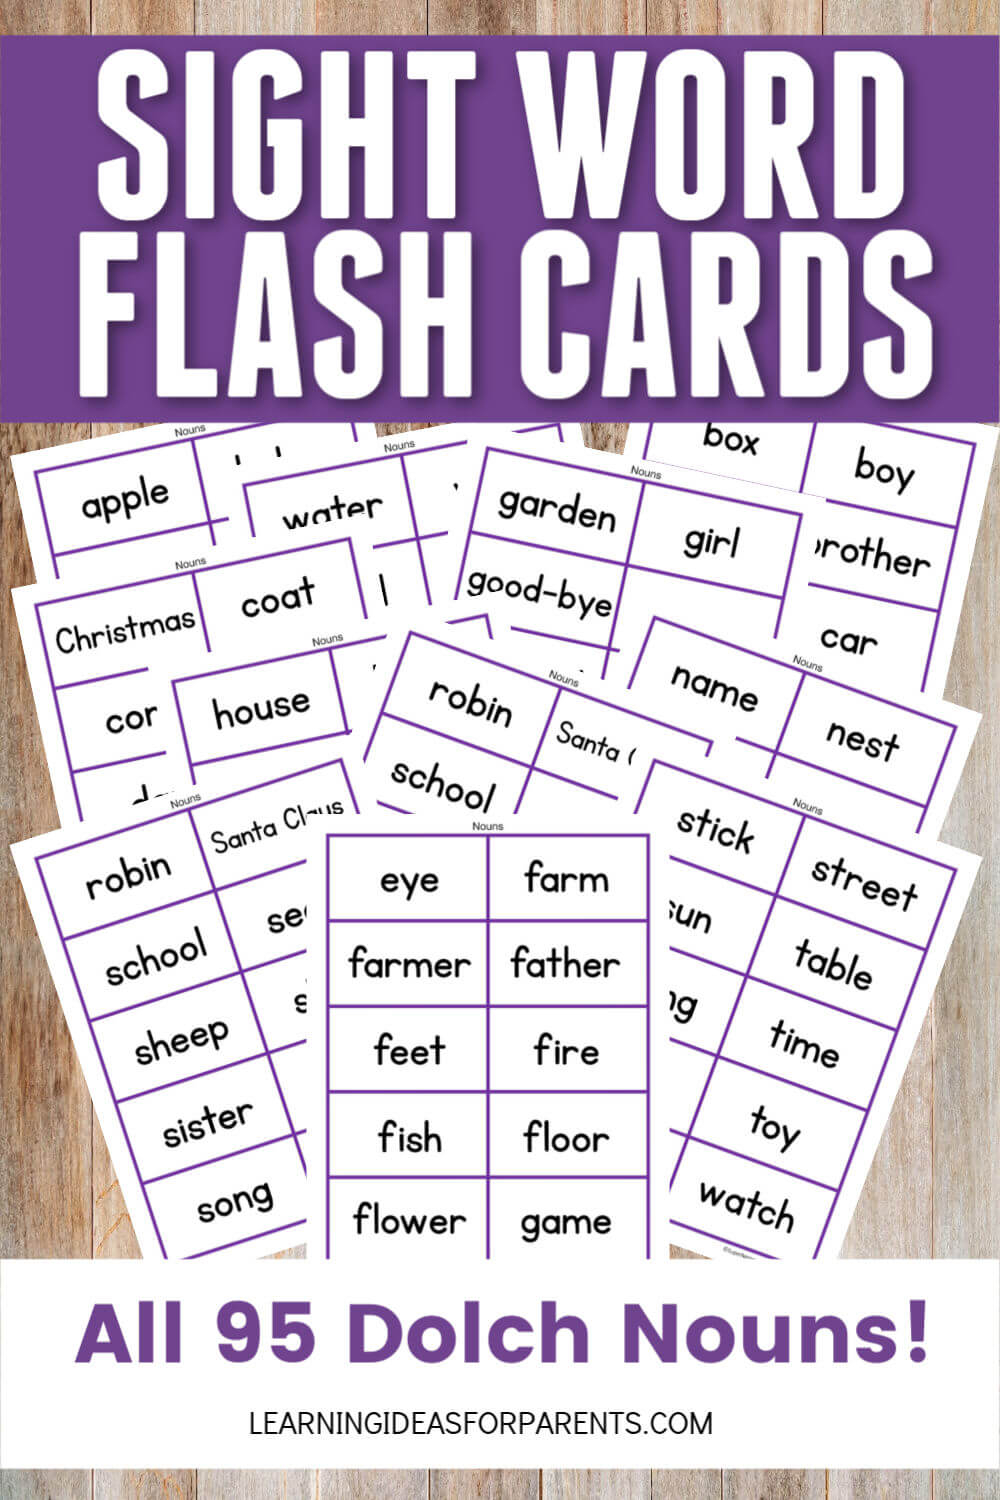 Dolch Nouns Sight Word Flash Cards Free Printable